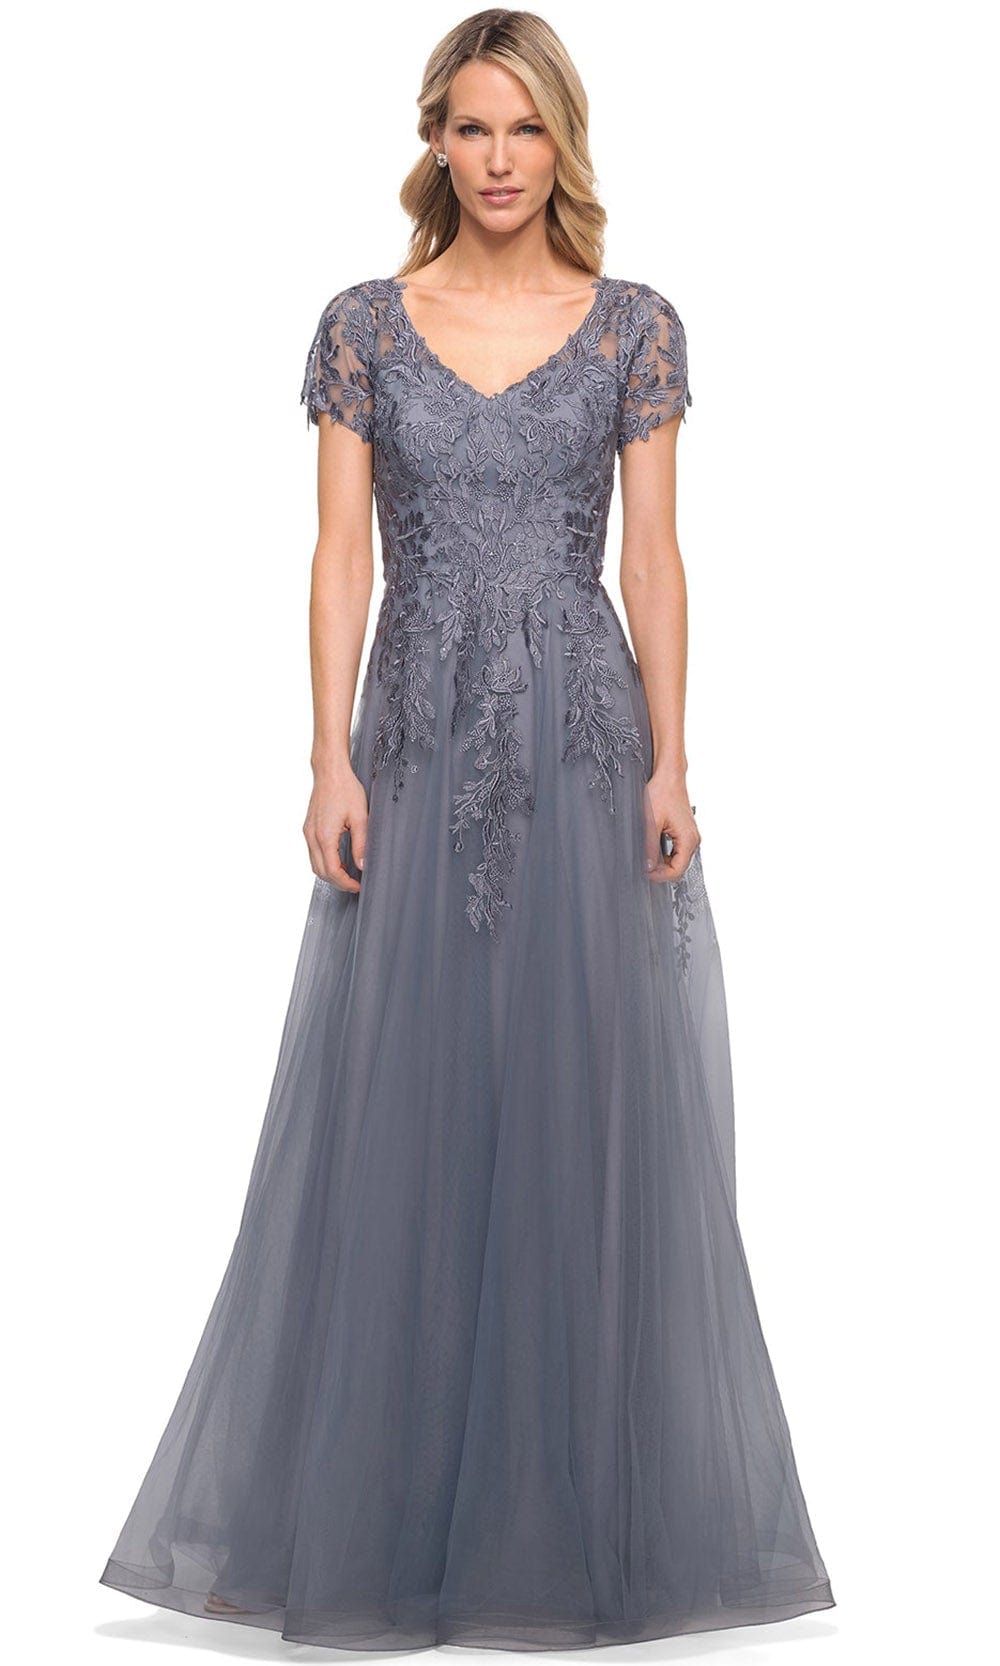 Image of La Femme 29164 - Lace Tulle A-Line Long Mother of the Bride Gown